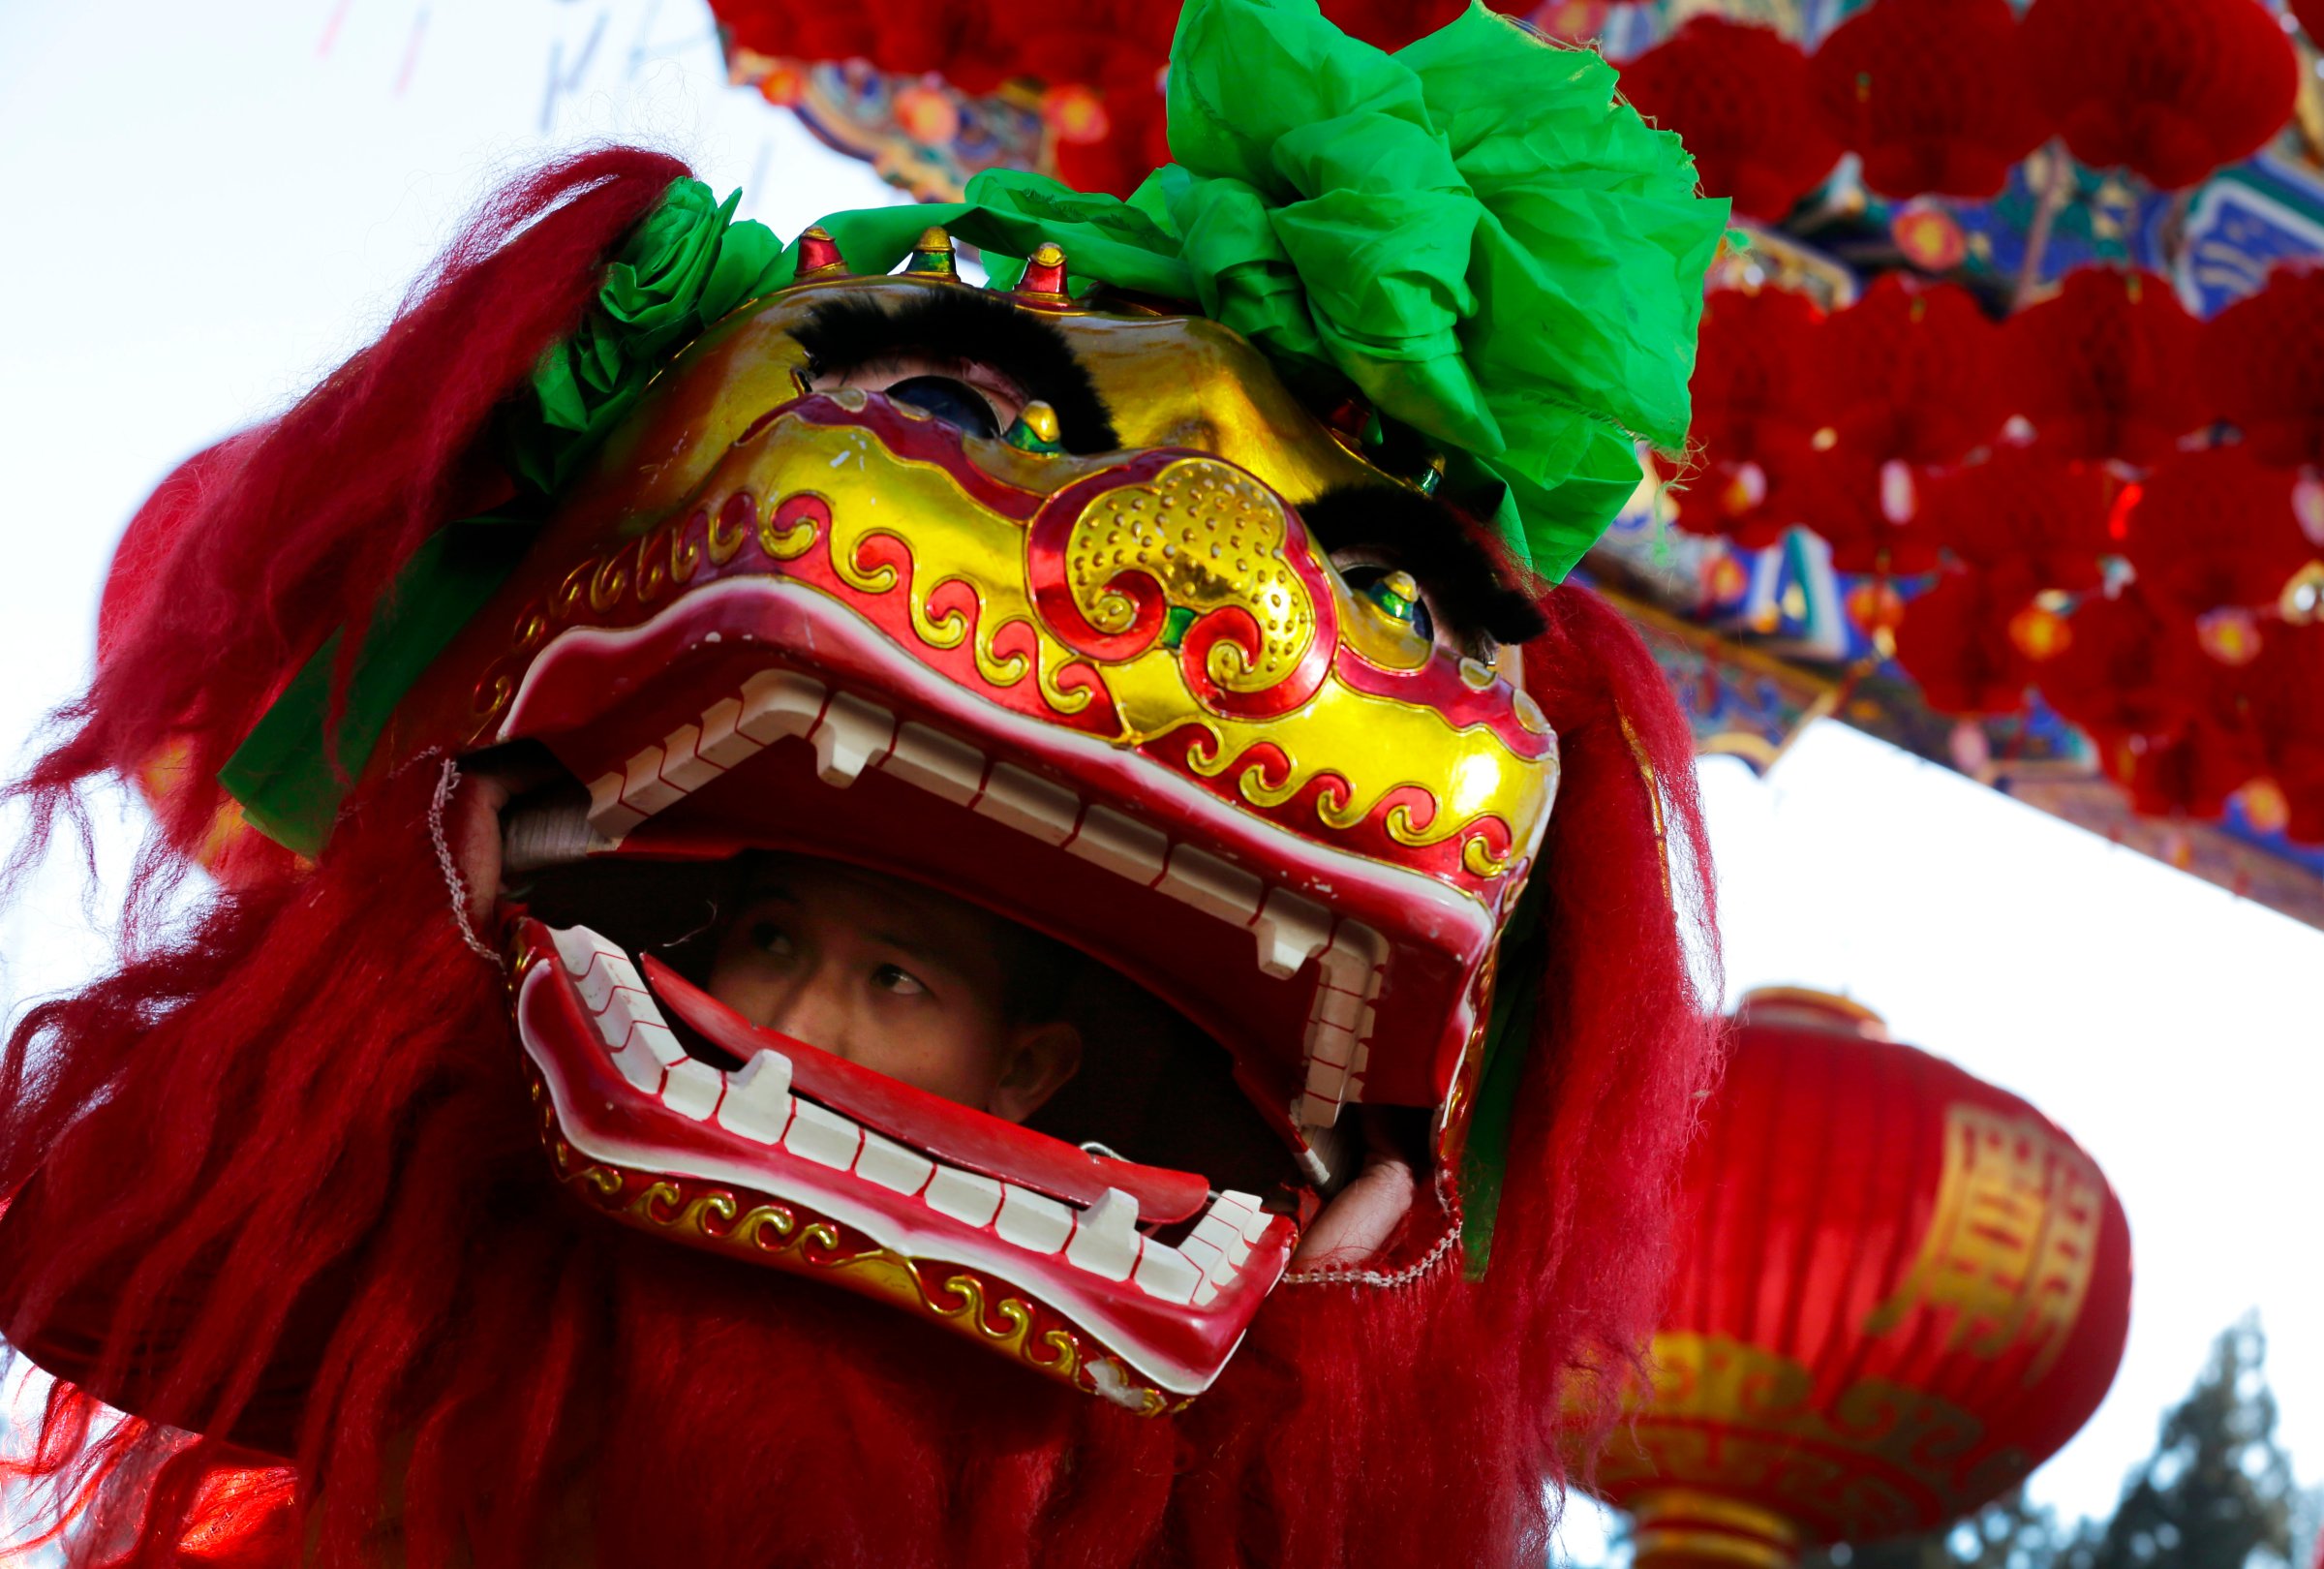 A performer looks out from the head of a lion dance costume during the opening of Ditan Temple Fair on the Lunar New Year's Eve in Beijing, China Wednesday, Feb. 18, 2015